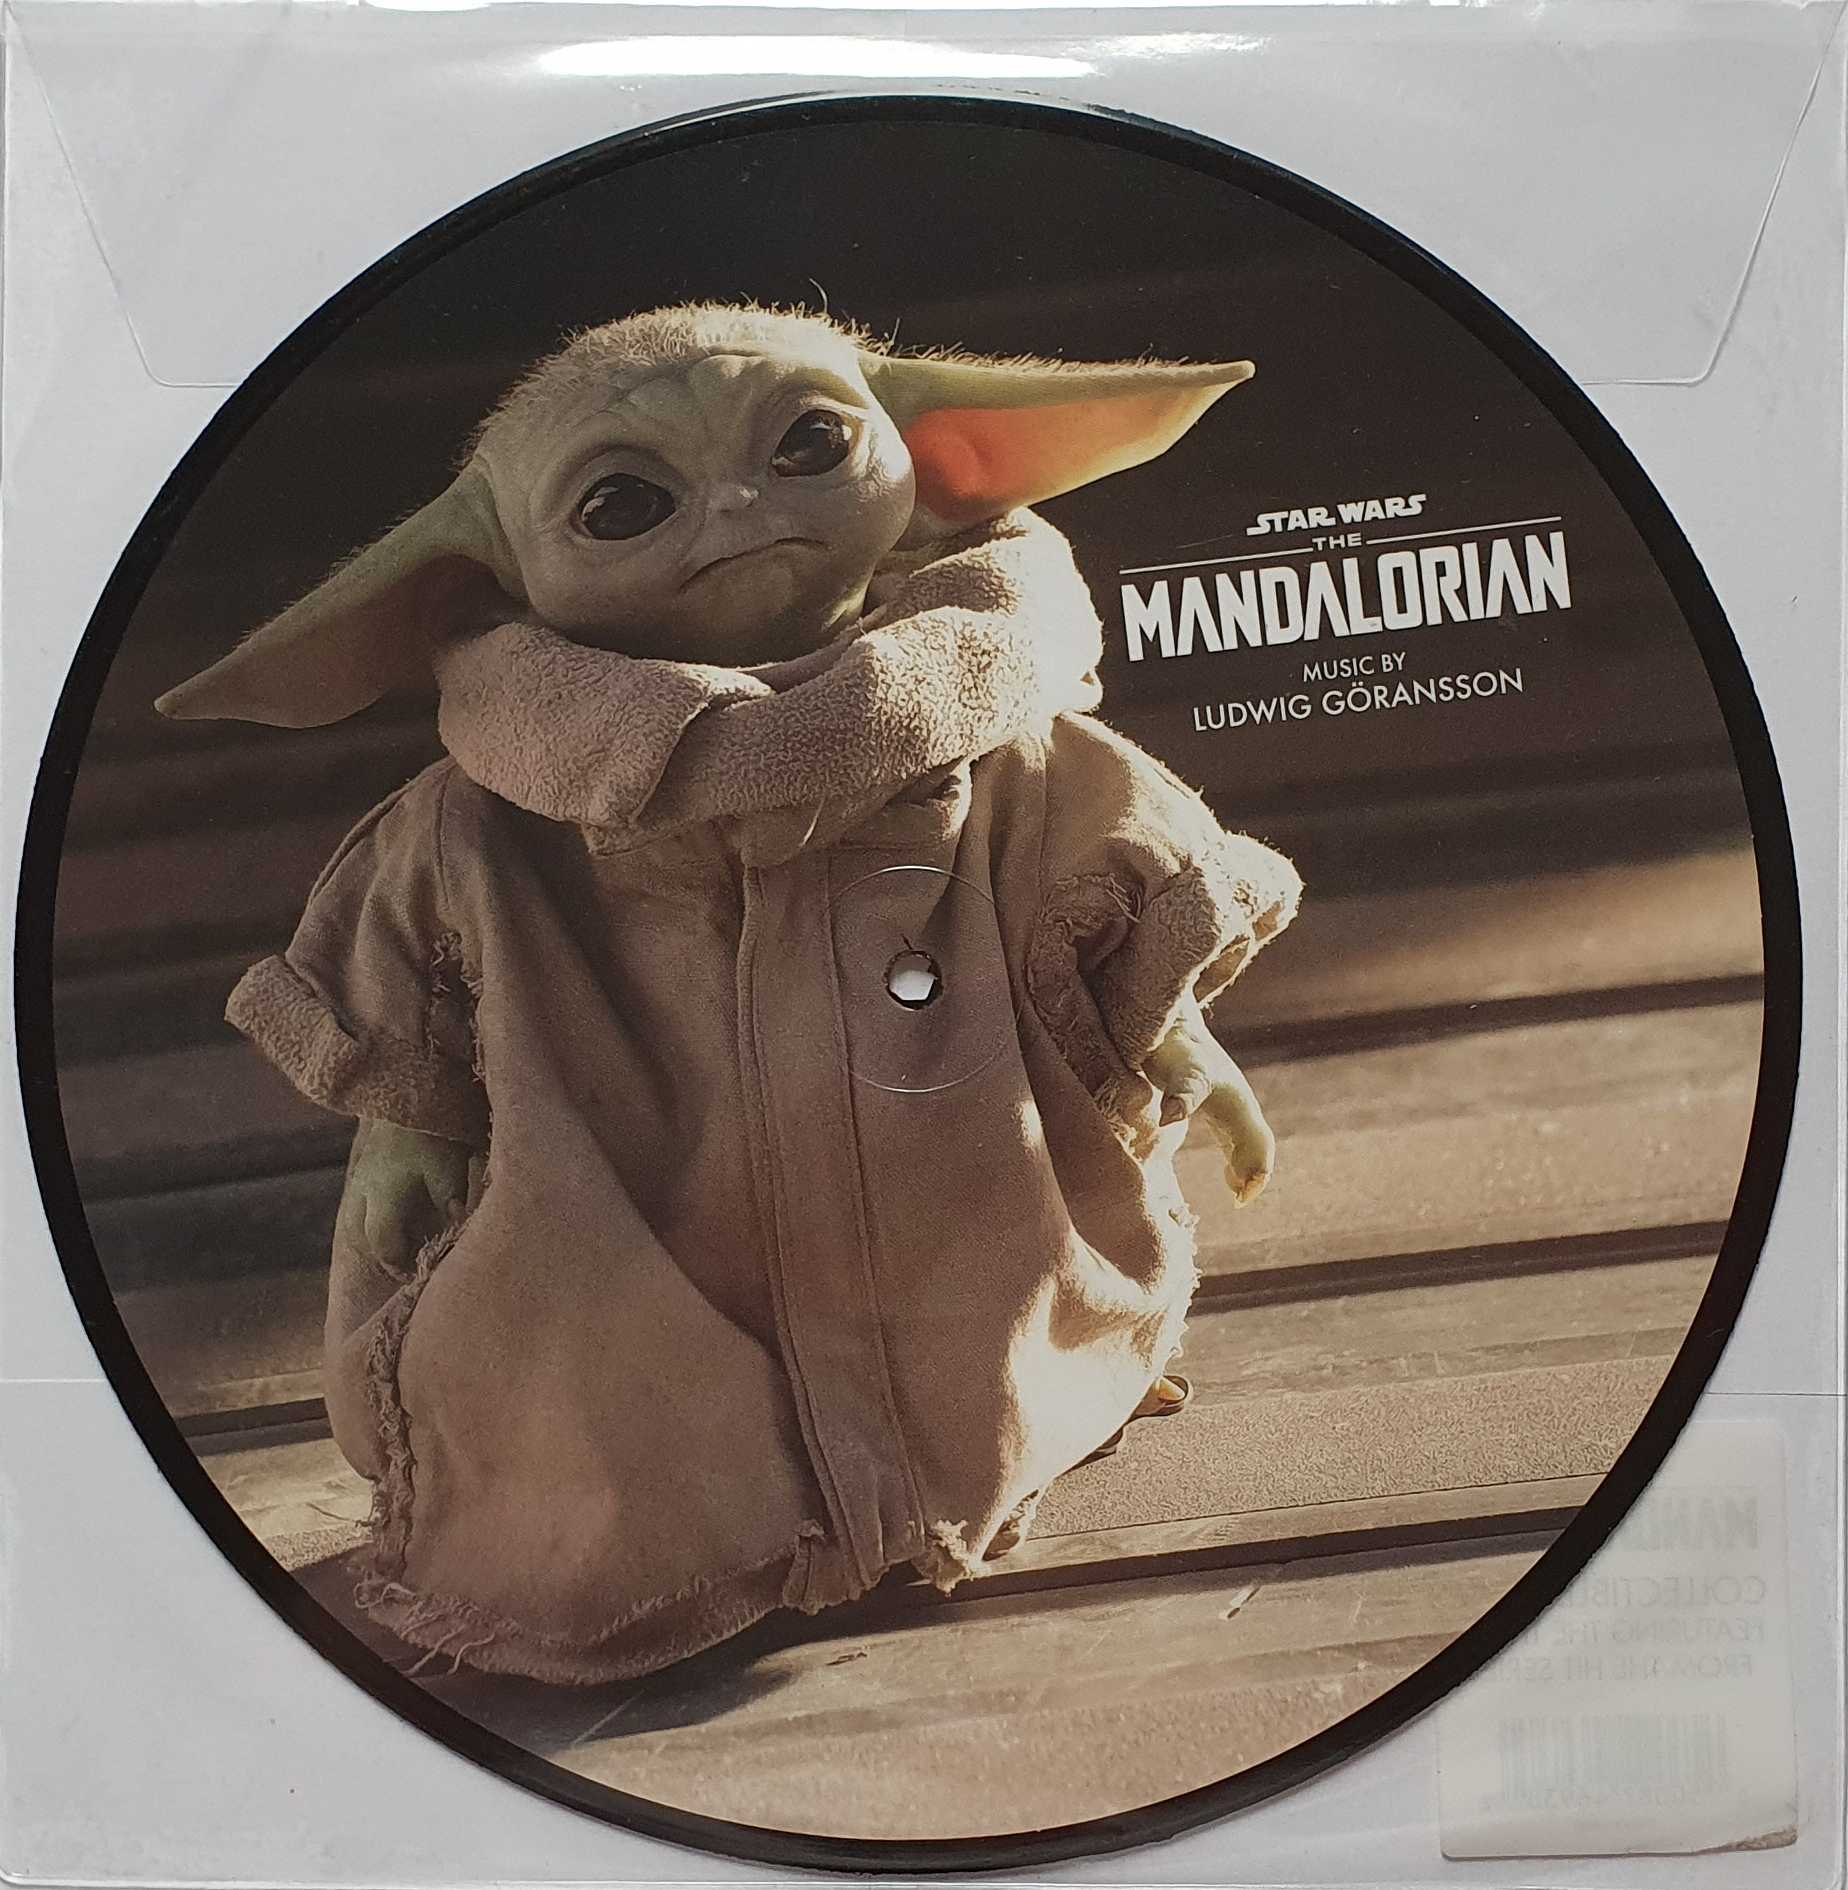 Picture of 00050087469382 Star Wars: The Mandalorian - Picture disc by artist Ludwig Goransson 